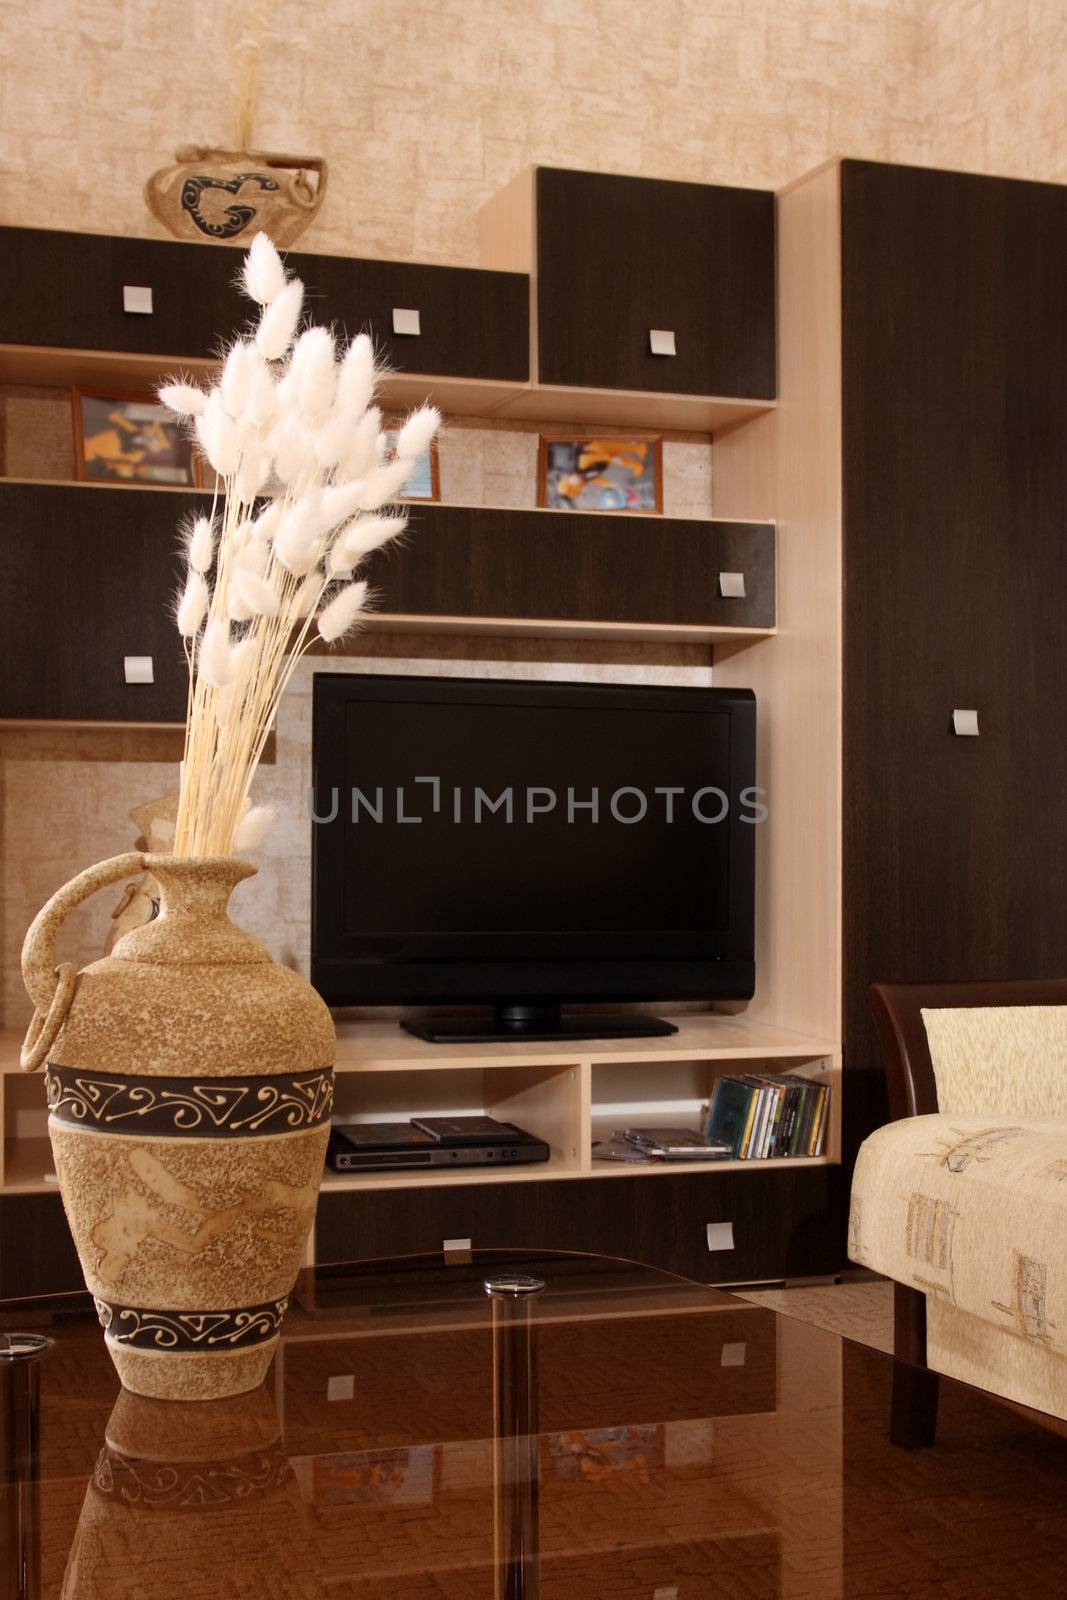 Studio photographing of an interior of a living room

